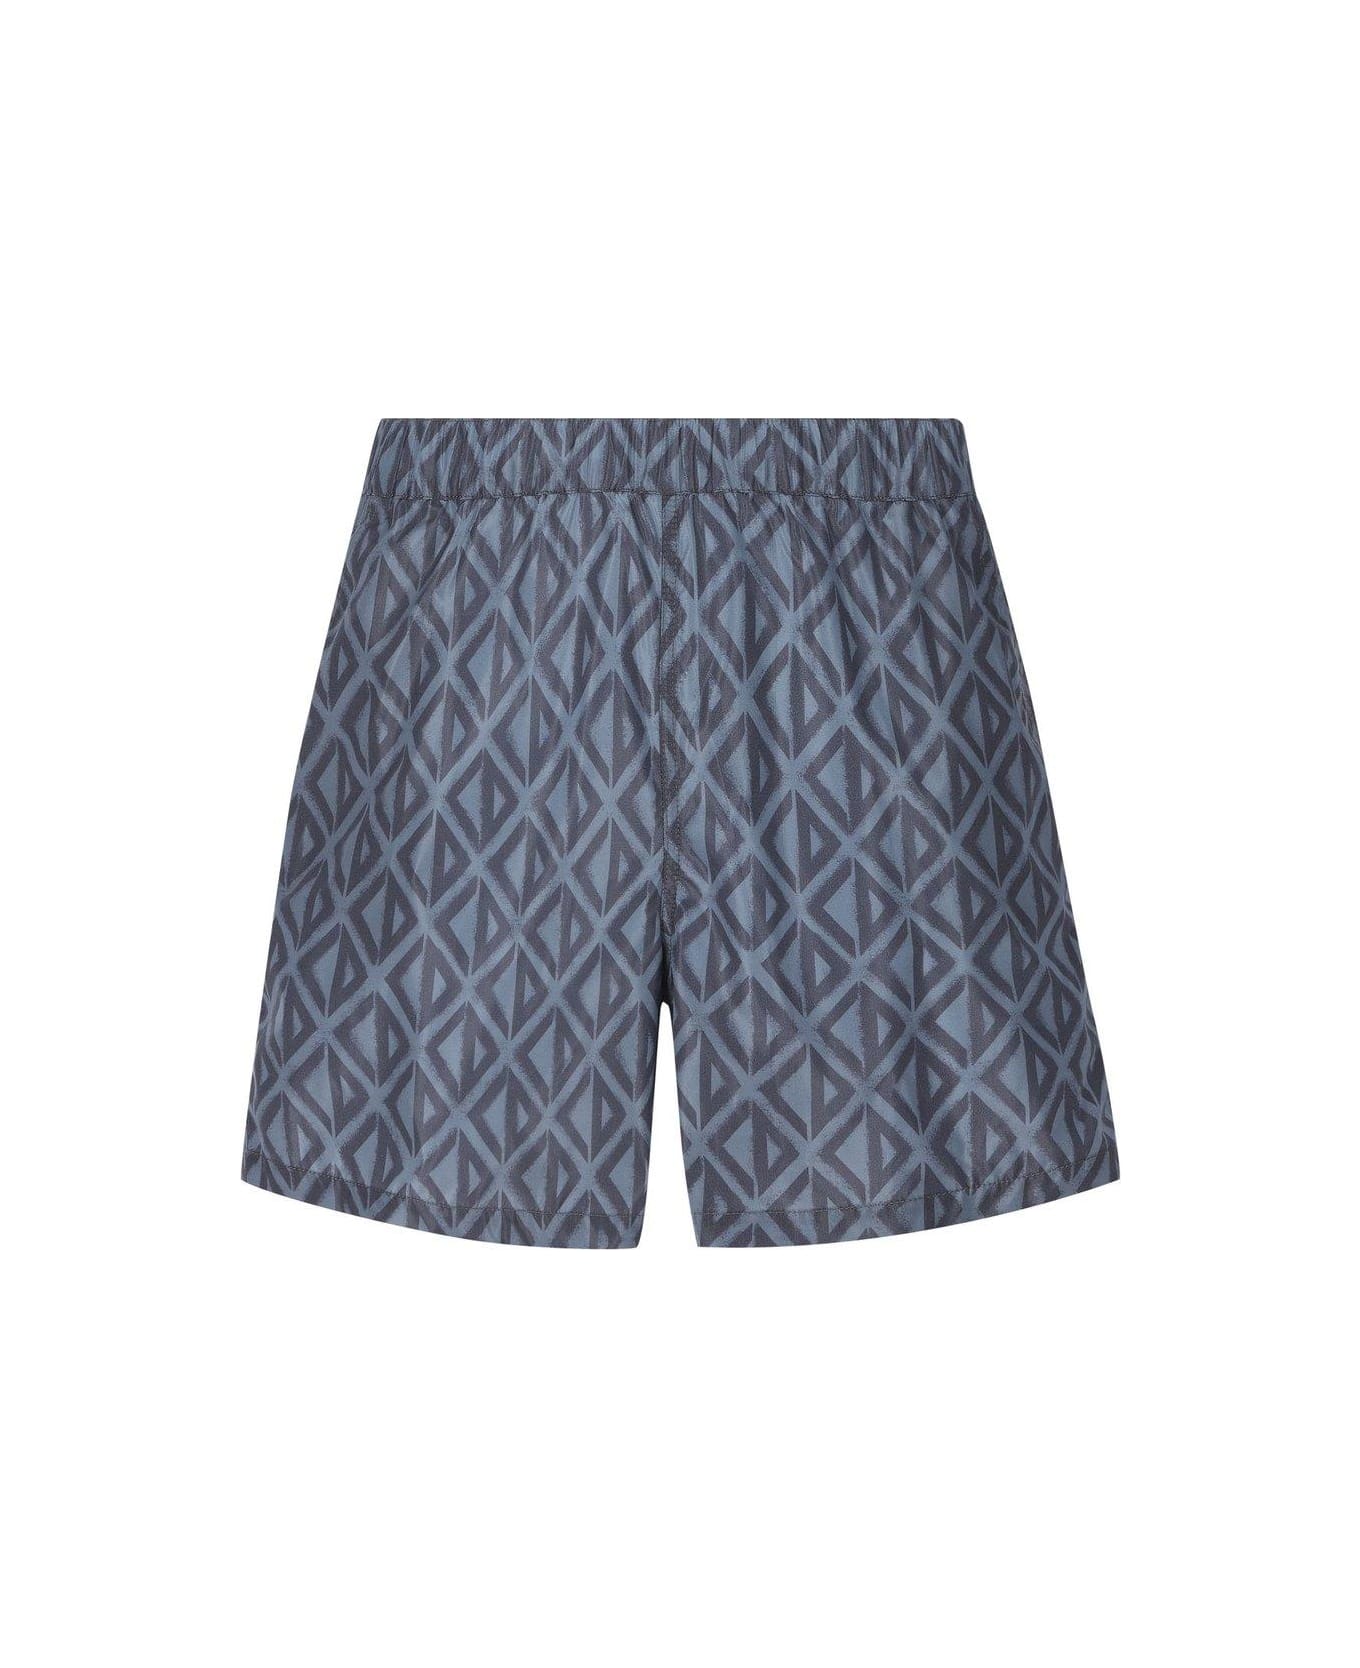 Dior All-over Printed Mid-rise Swim Shorts